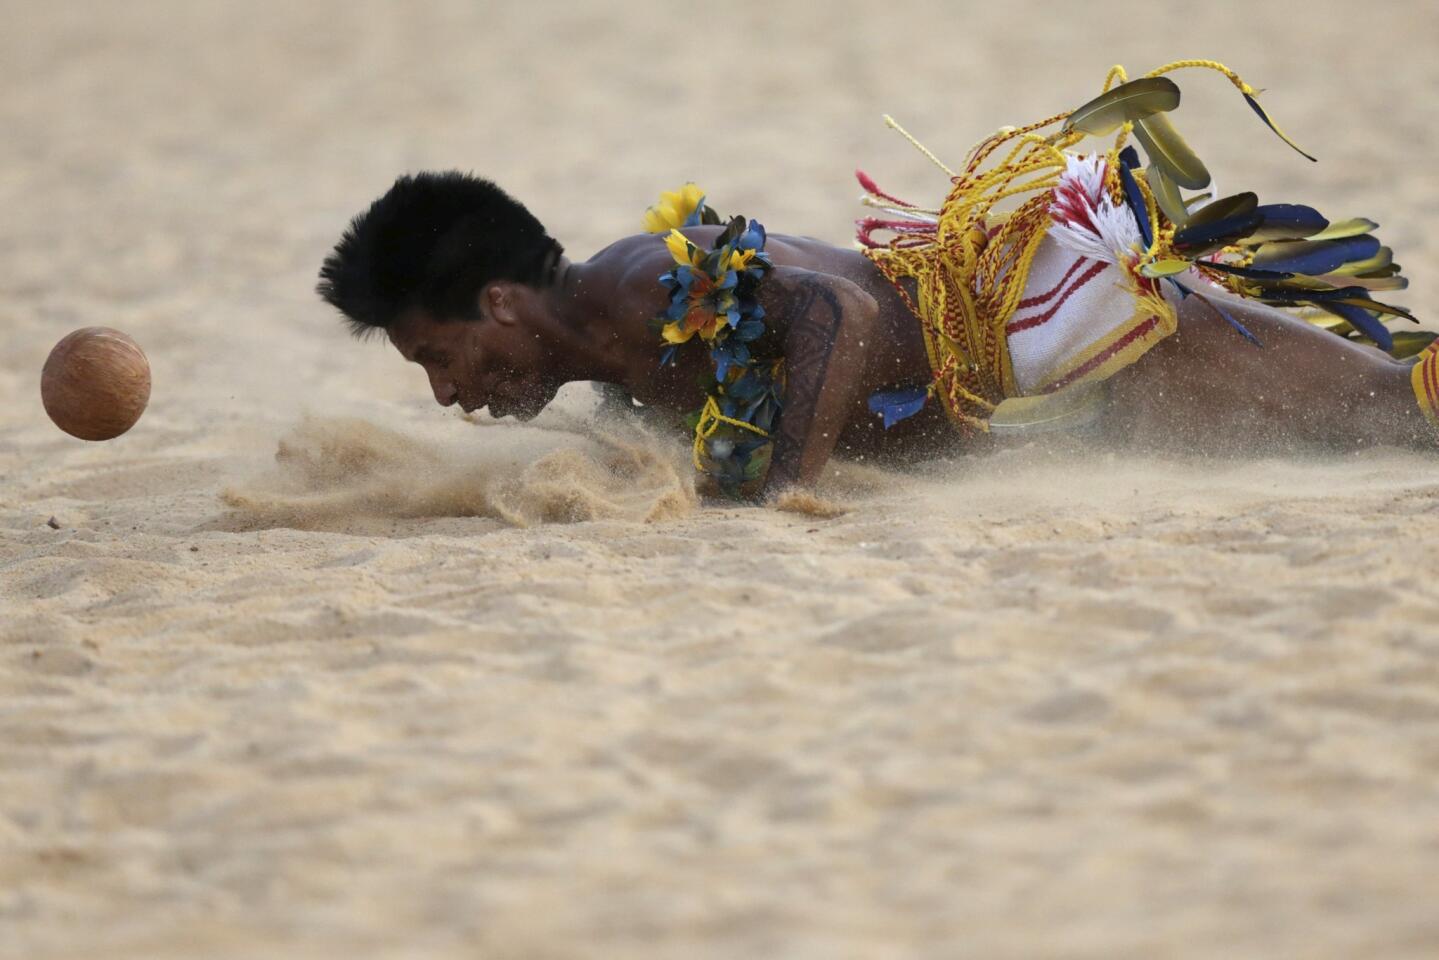 An indigenous man from the Paresi tribe tries to head the ball during the Jikunahati competition, a form of soccer played with one's head, at the first World Games for Indigenous Peoples in Palmas